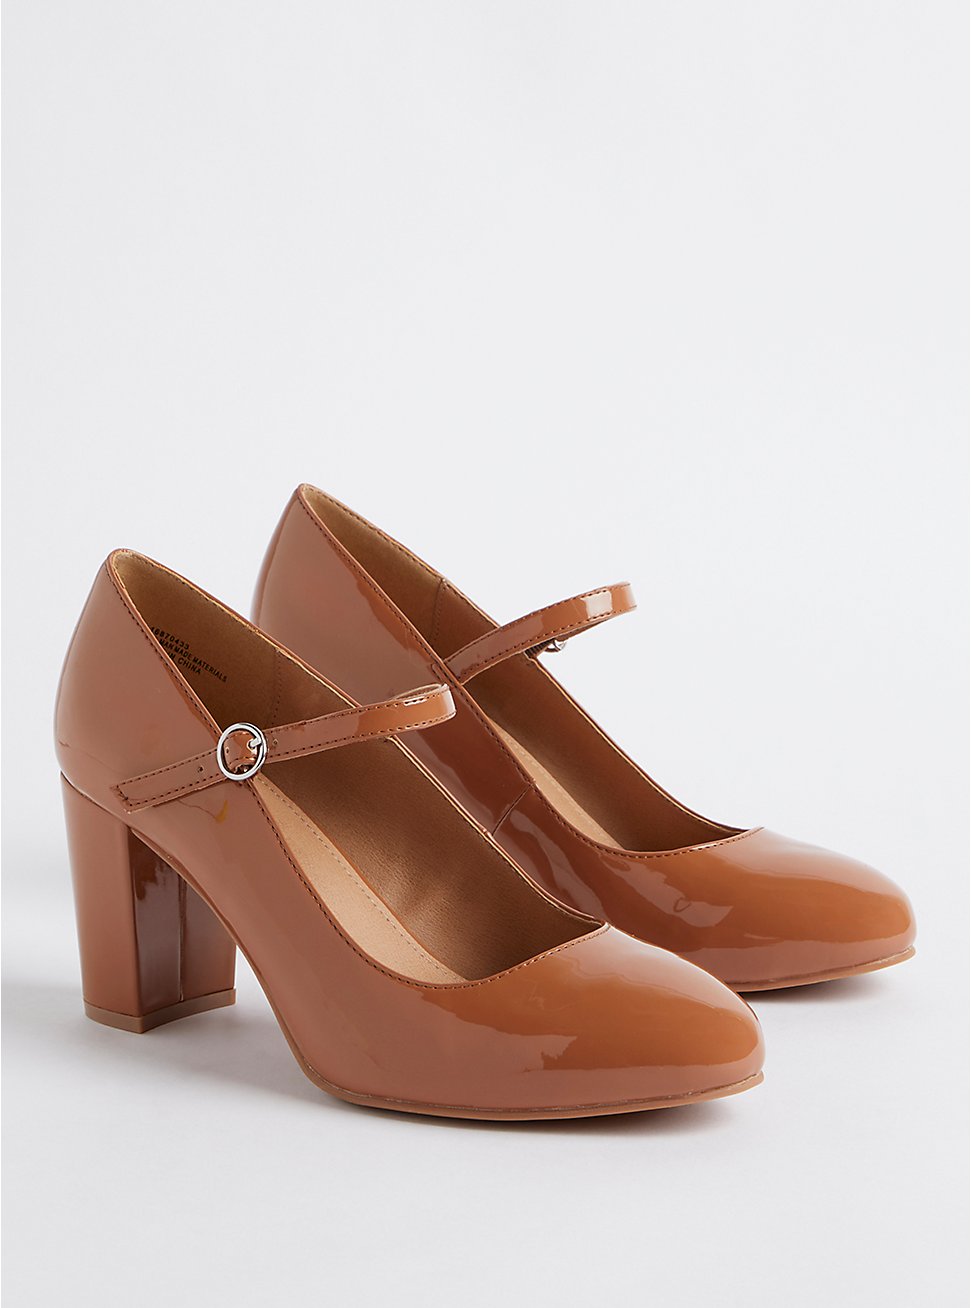 Plus Size Mary Jane Pump - Patent Leather Brown Blush (WW), BROWN, hi-res